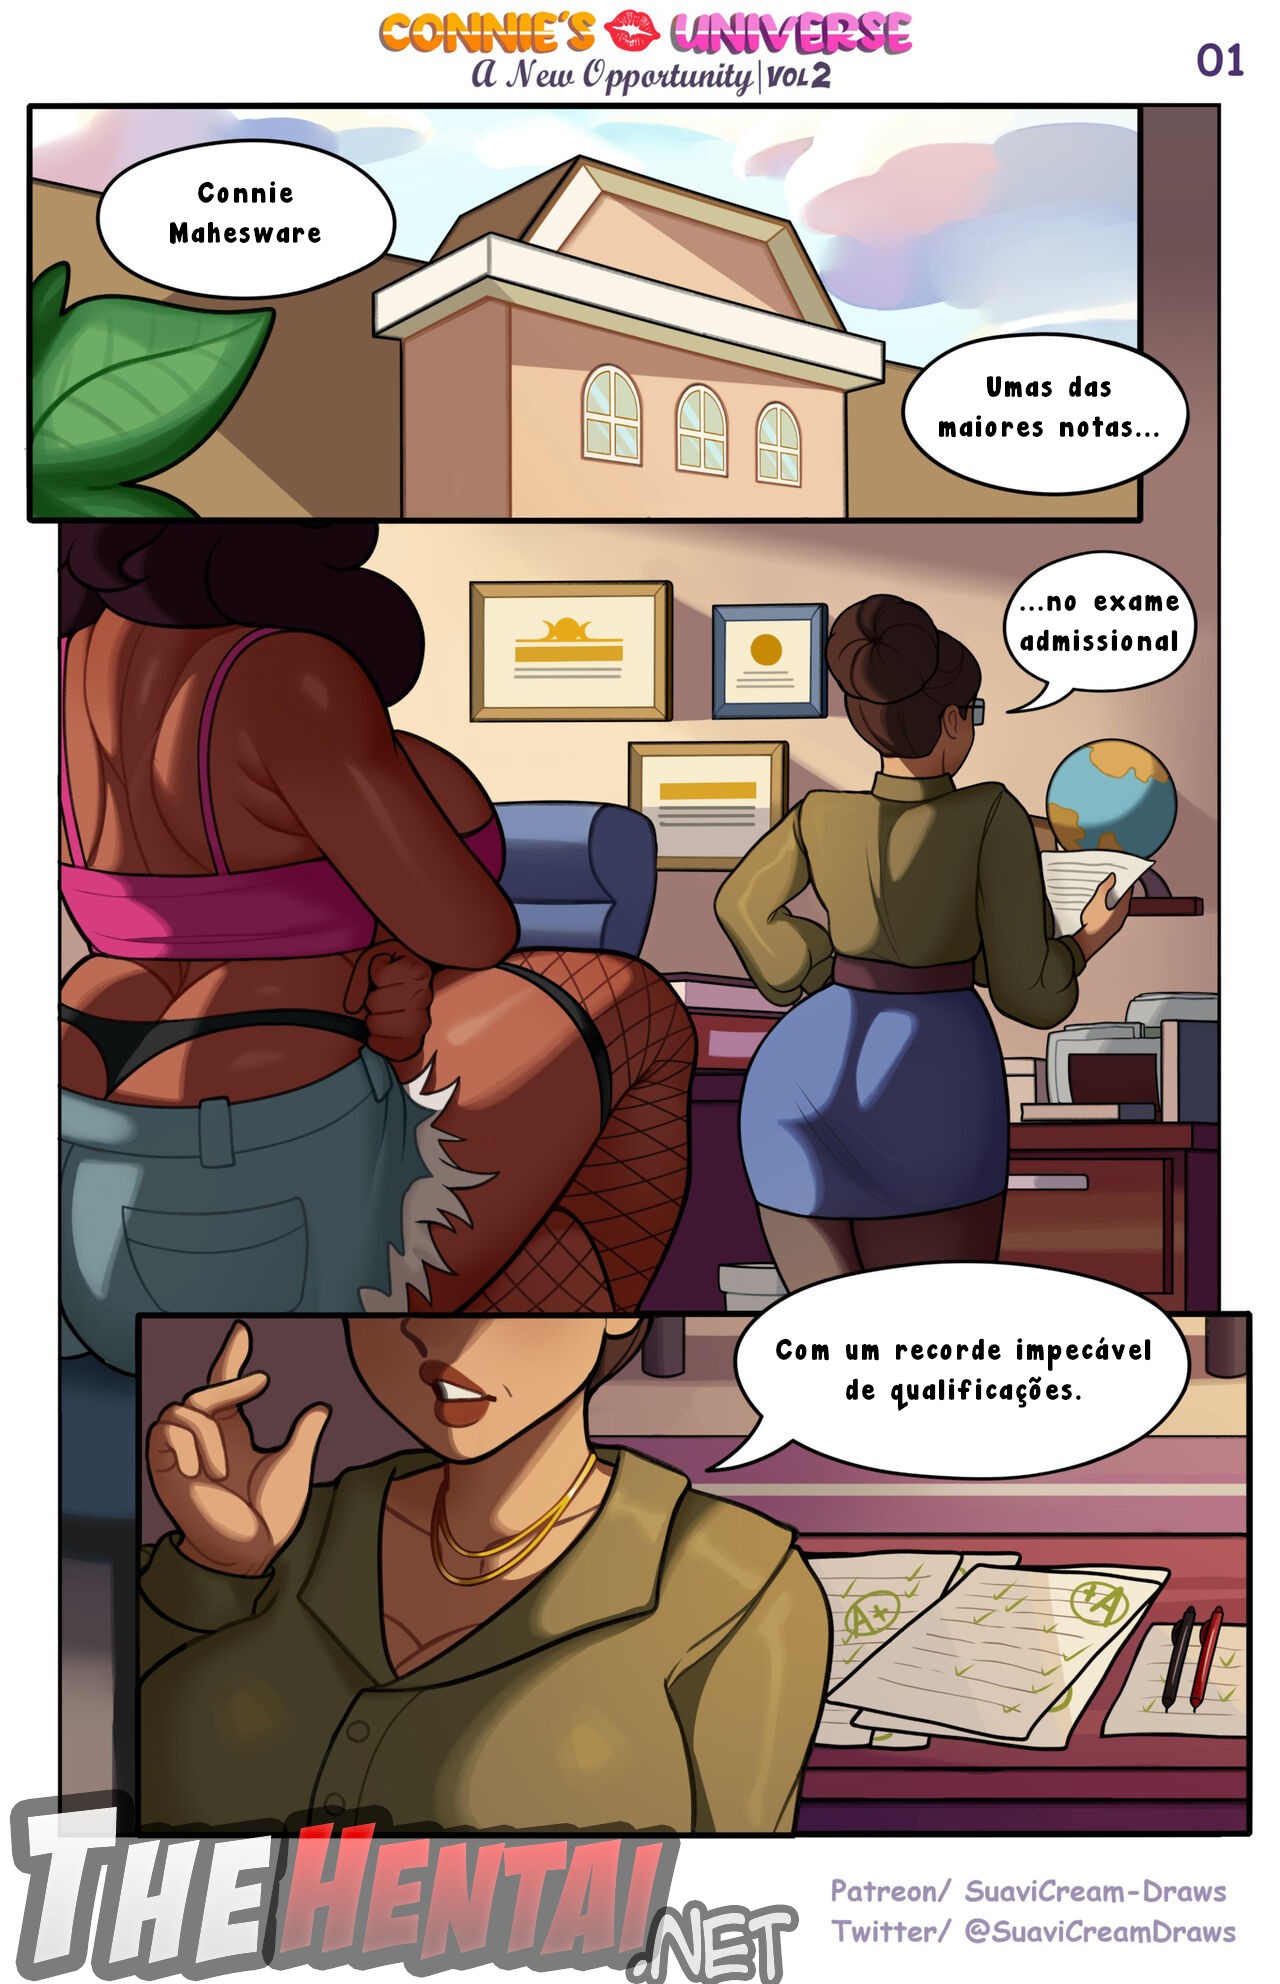 Connie’s Universe: A New Opportunity Part 2 Hentai pt-br 02